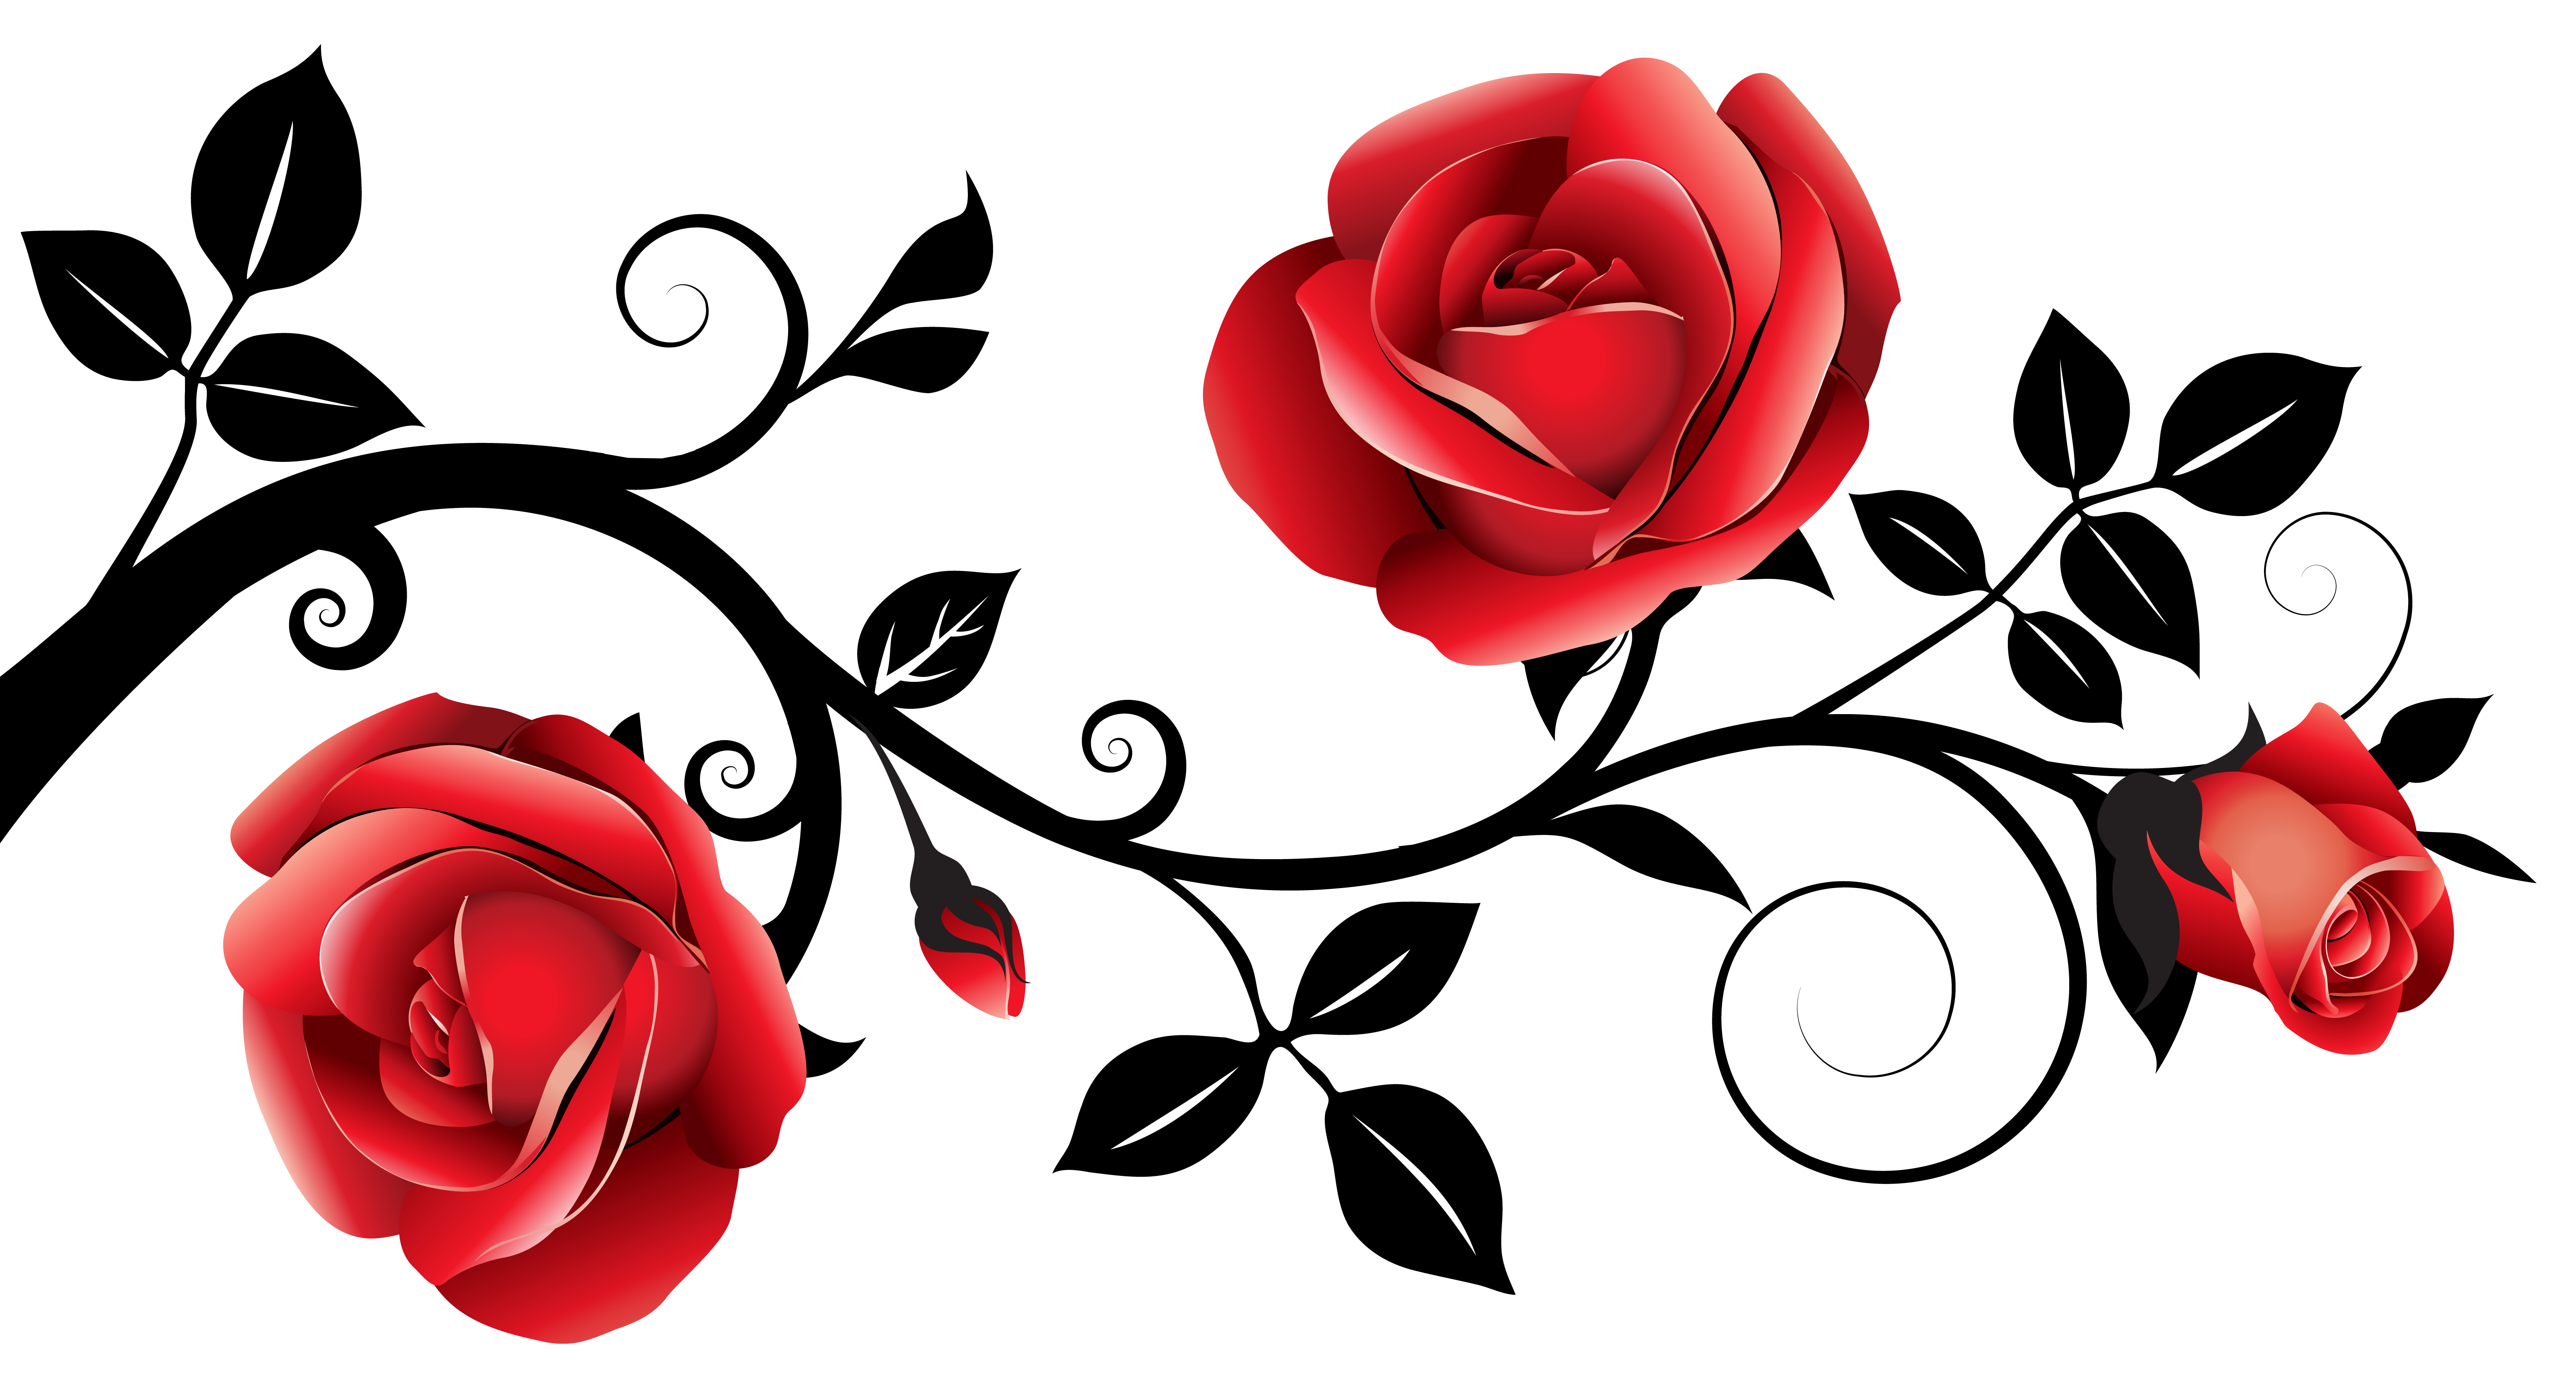 Red and black decorative. Clipart roses logo